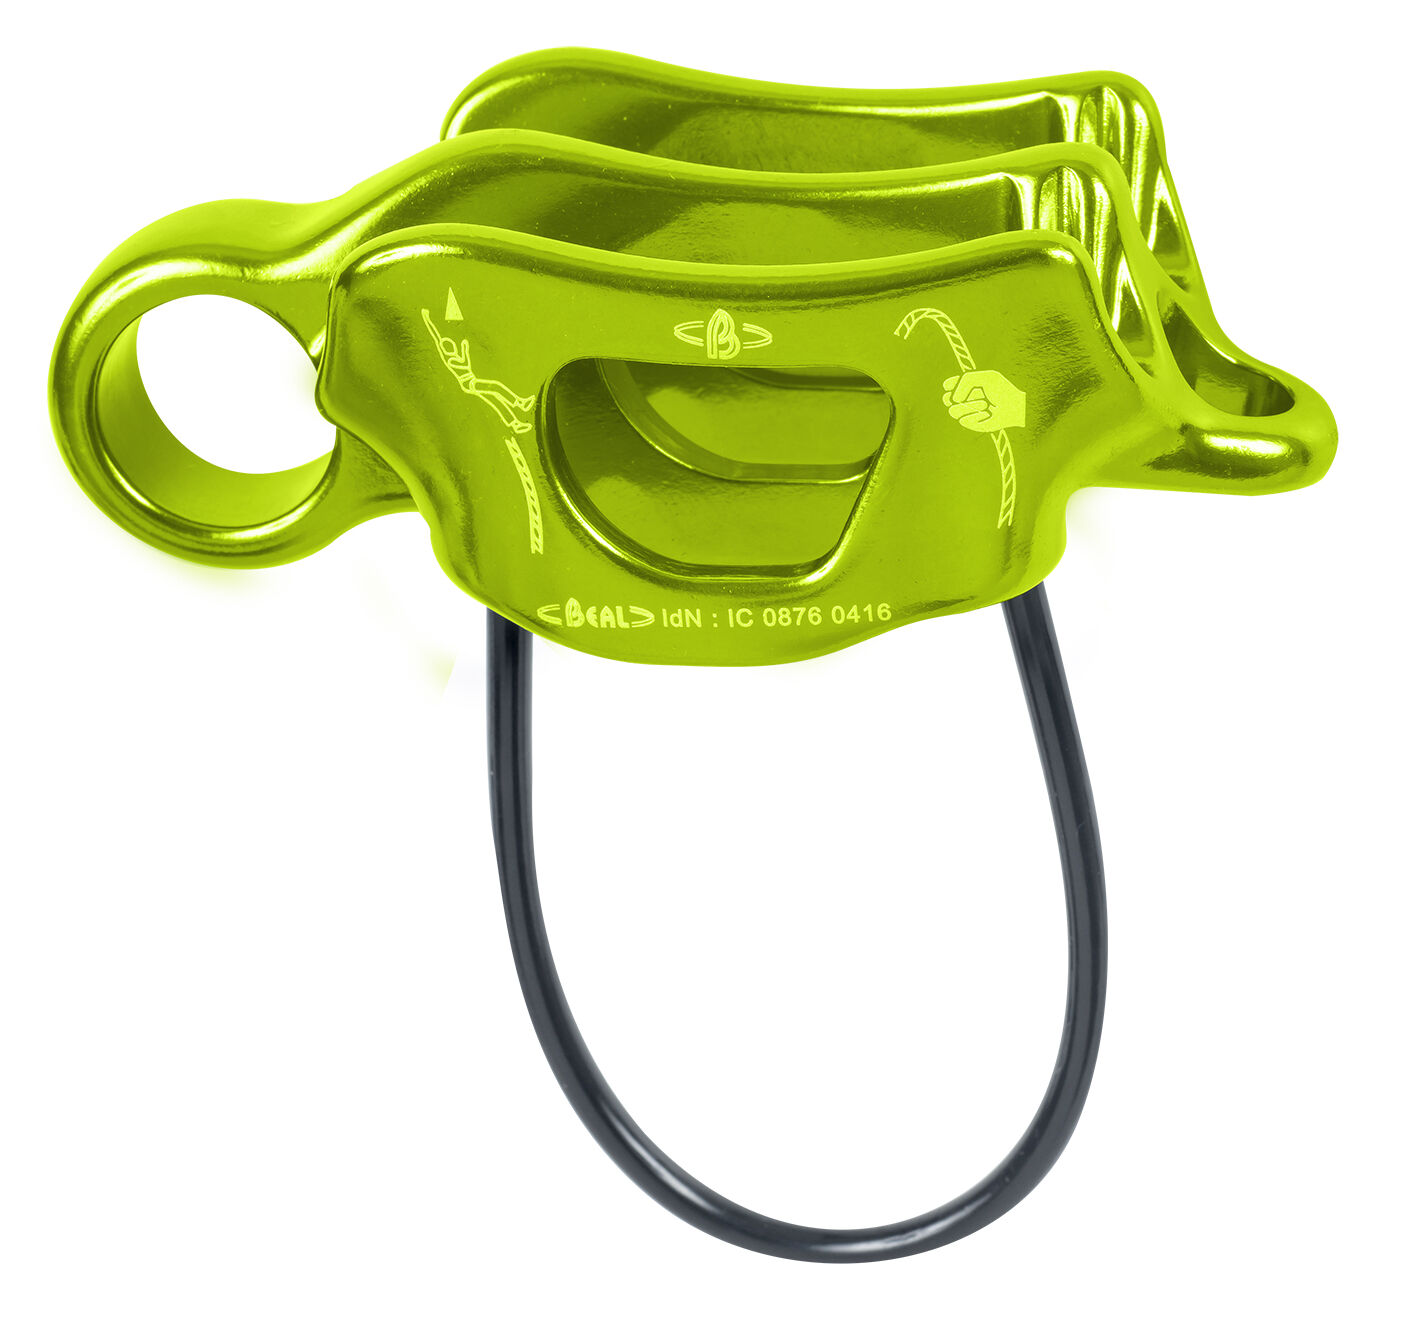 Beal - Air Force 3 - Belay device